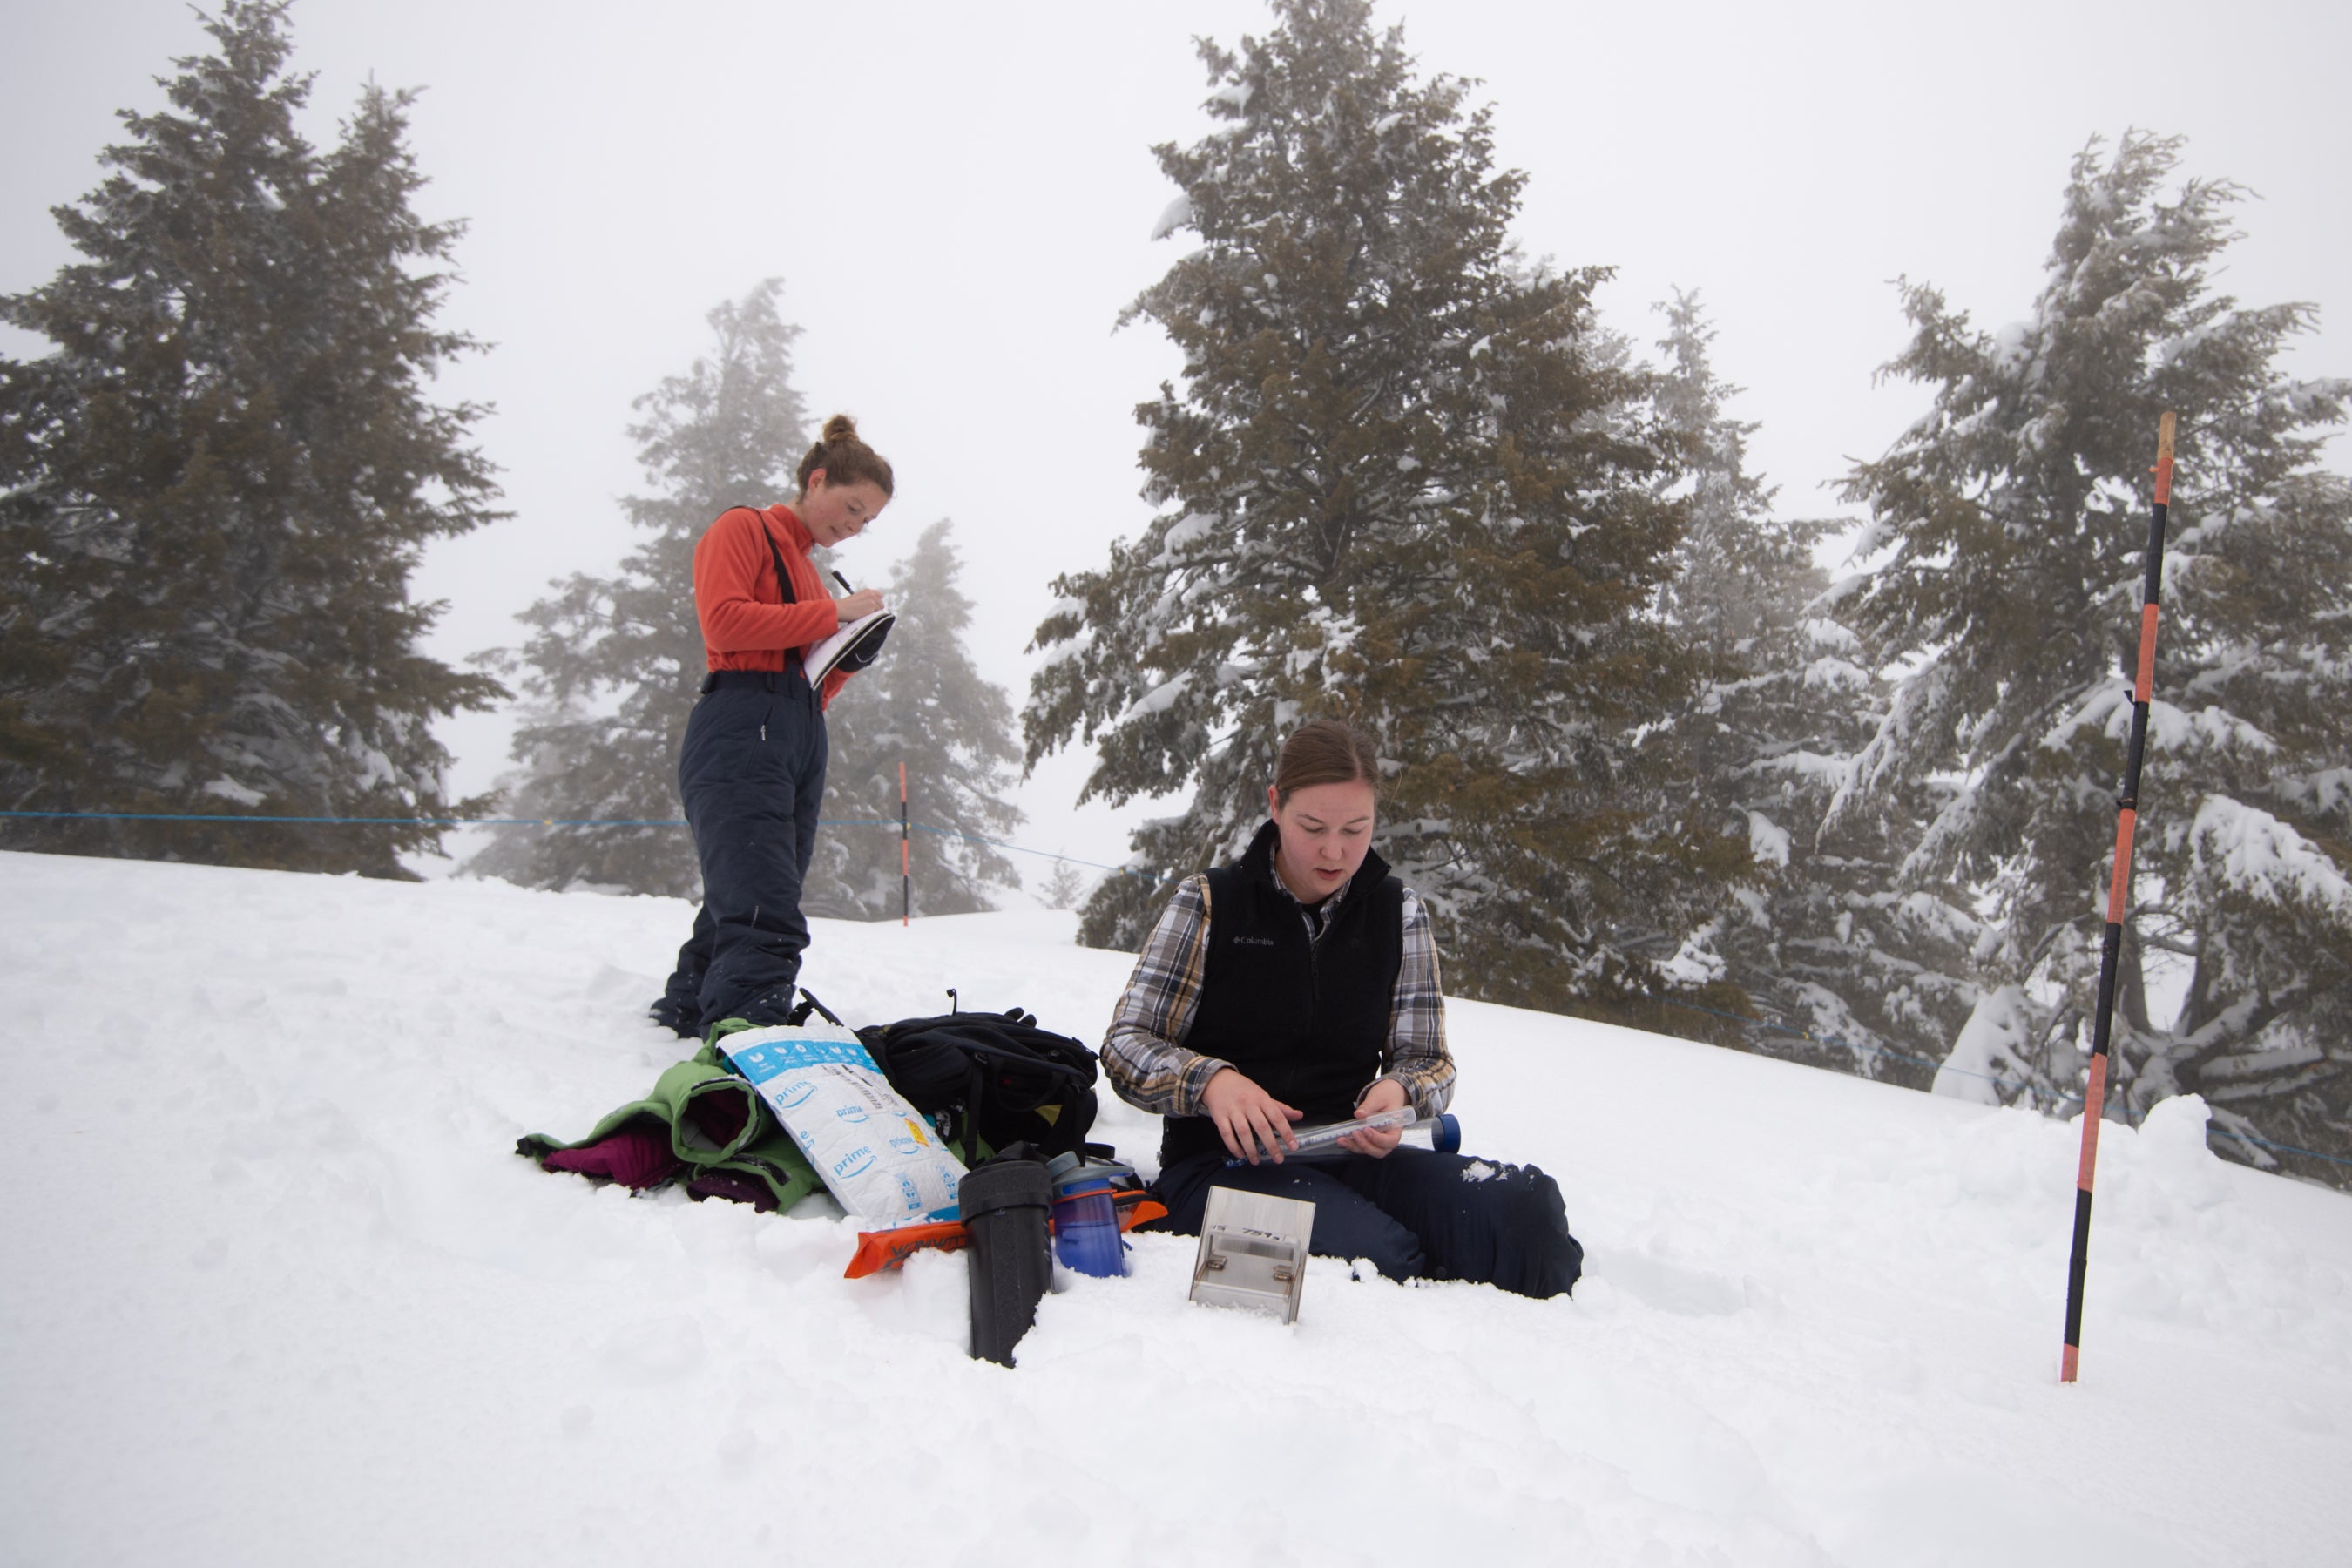 Two student conduct research on snowy mountain